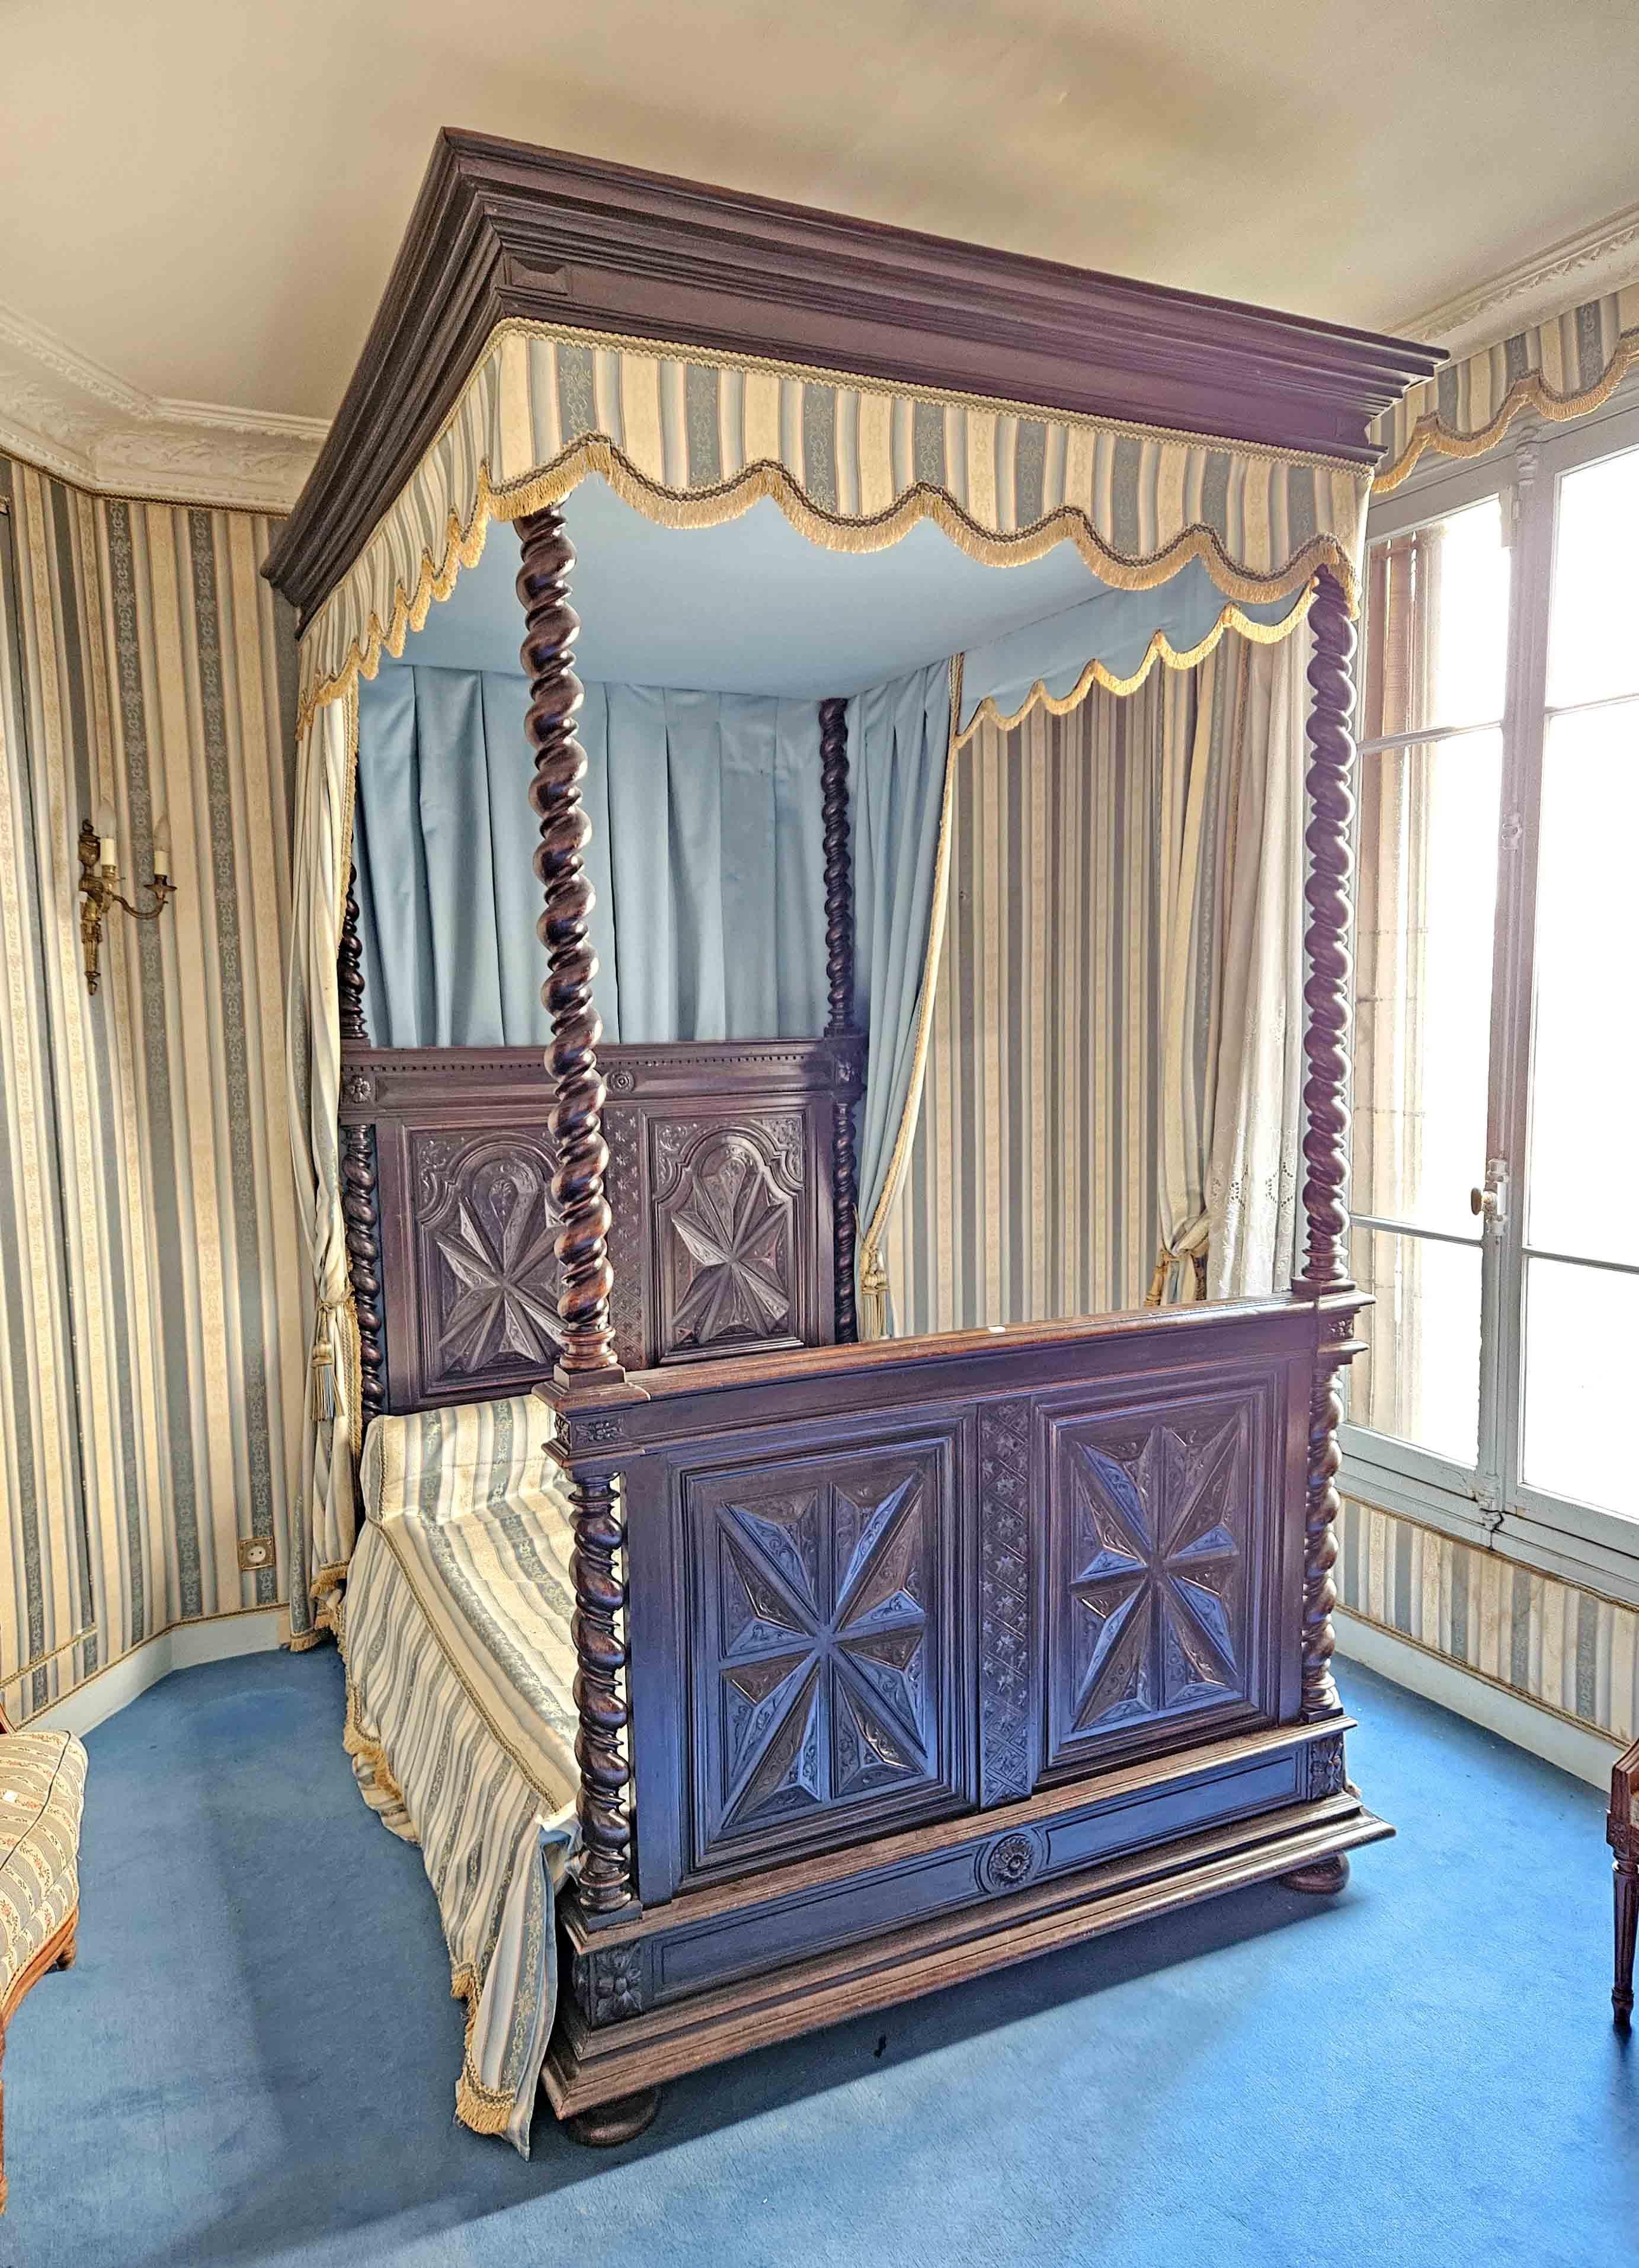 Canopy bed, in molded and carved solid wood, headboard and footboard with diamond-point decoration, architectural moldings and Solomonic columns. The canopy with hangings and trimmings also rests on Solomonic columns.

 XIXth century, in the style